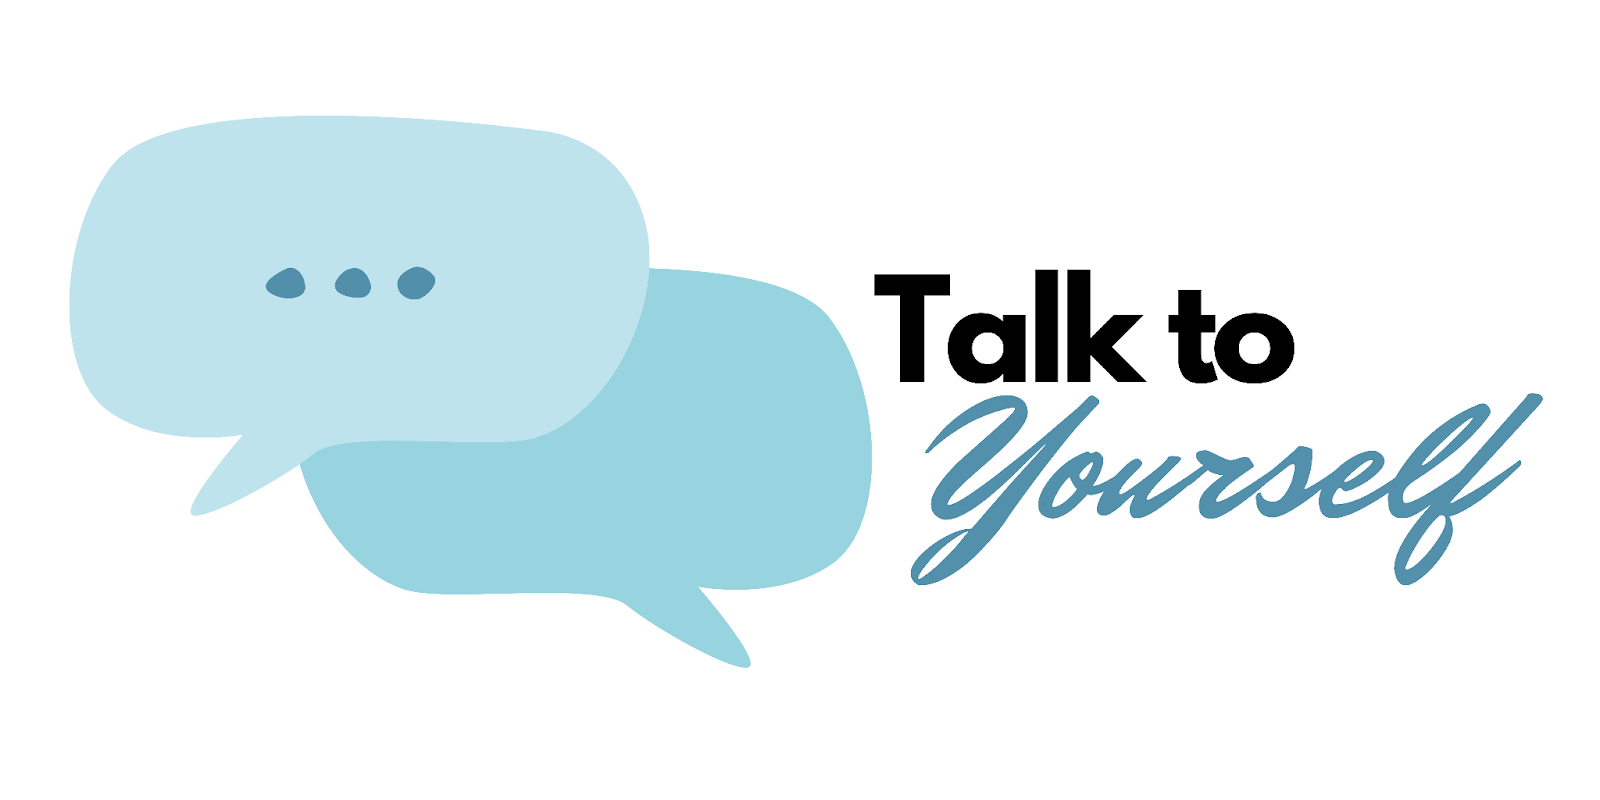 This image says talk to yourself.